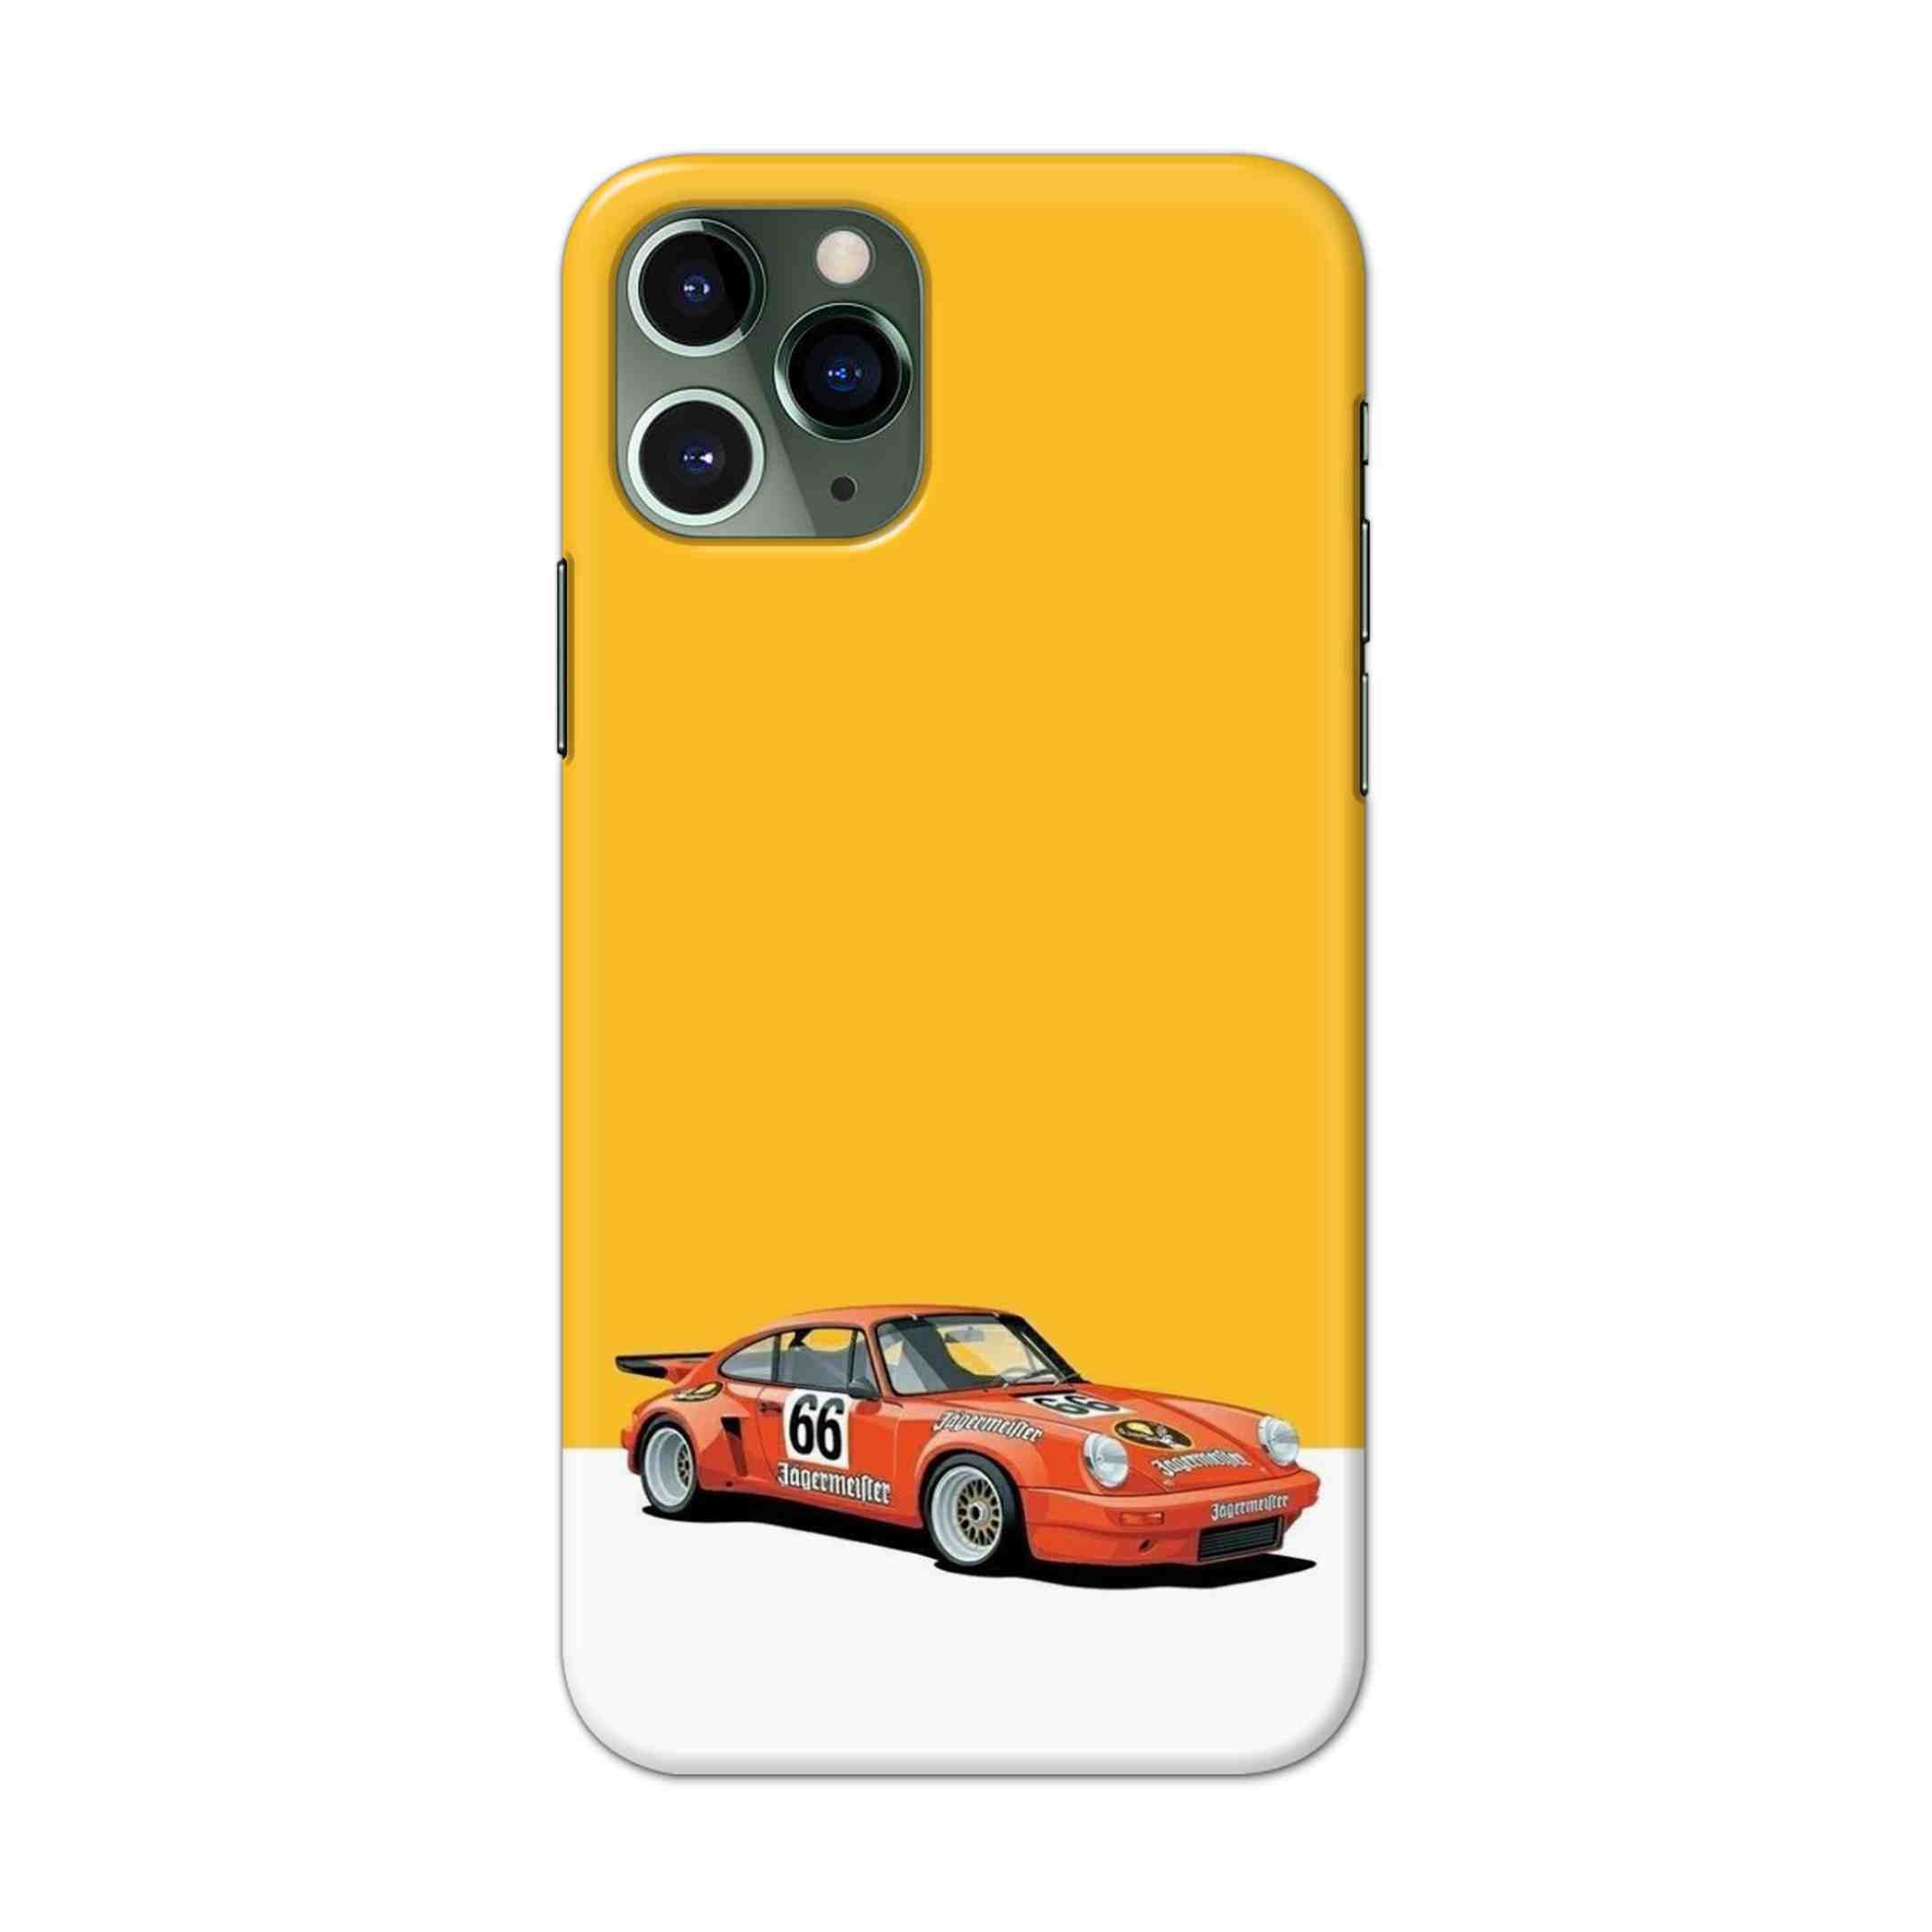 Buy Porche Hard Back Mobile Phone Case/Cover For iPhone 11 Pro Online